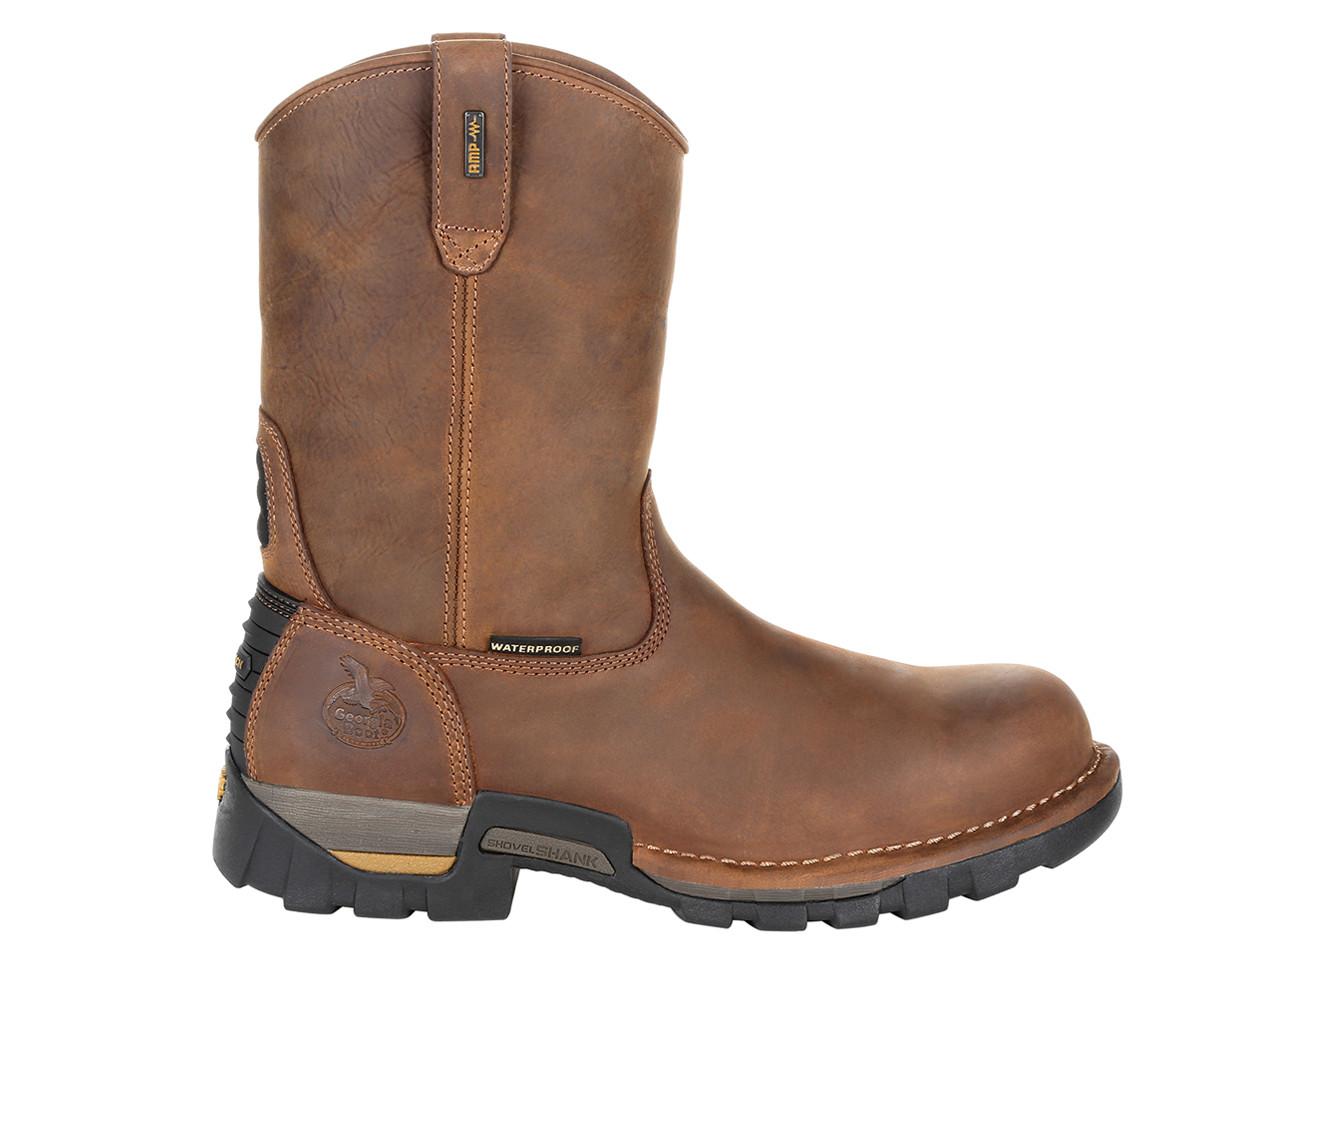 Men's Georgia Boot Eagle One Waterproof Pull On Work Boots